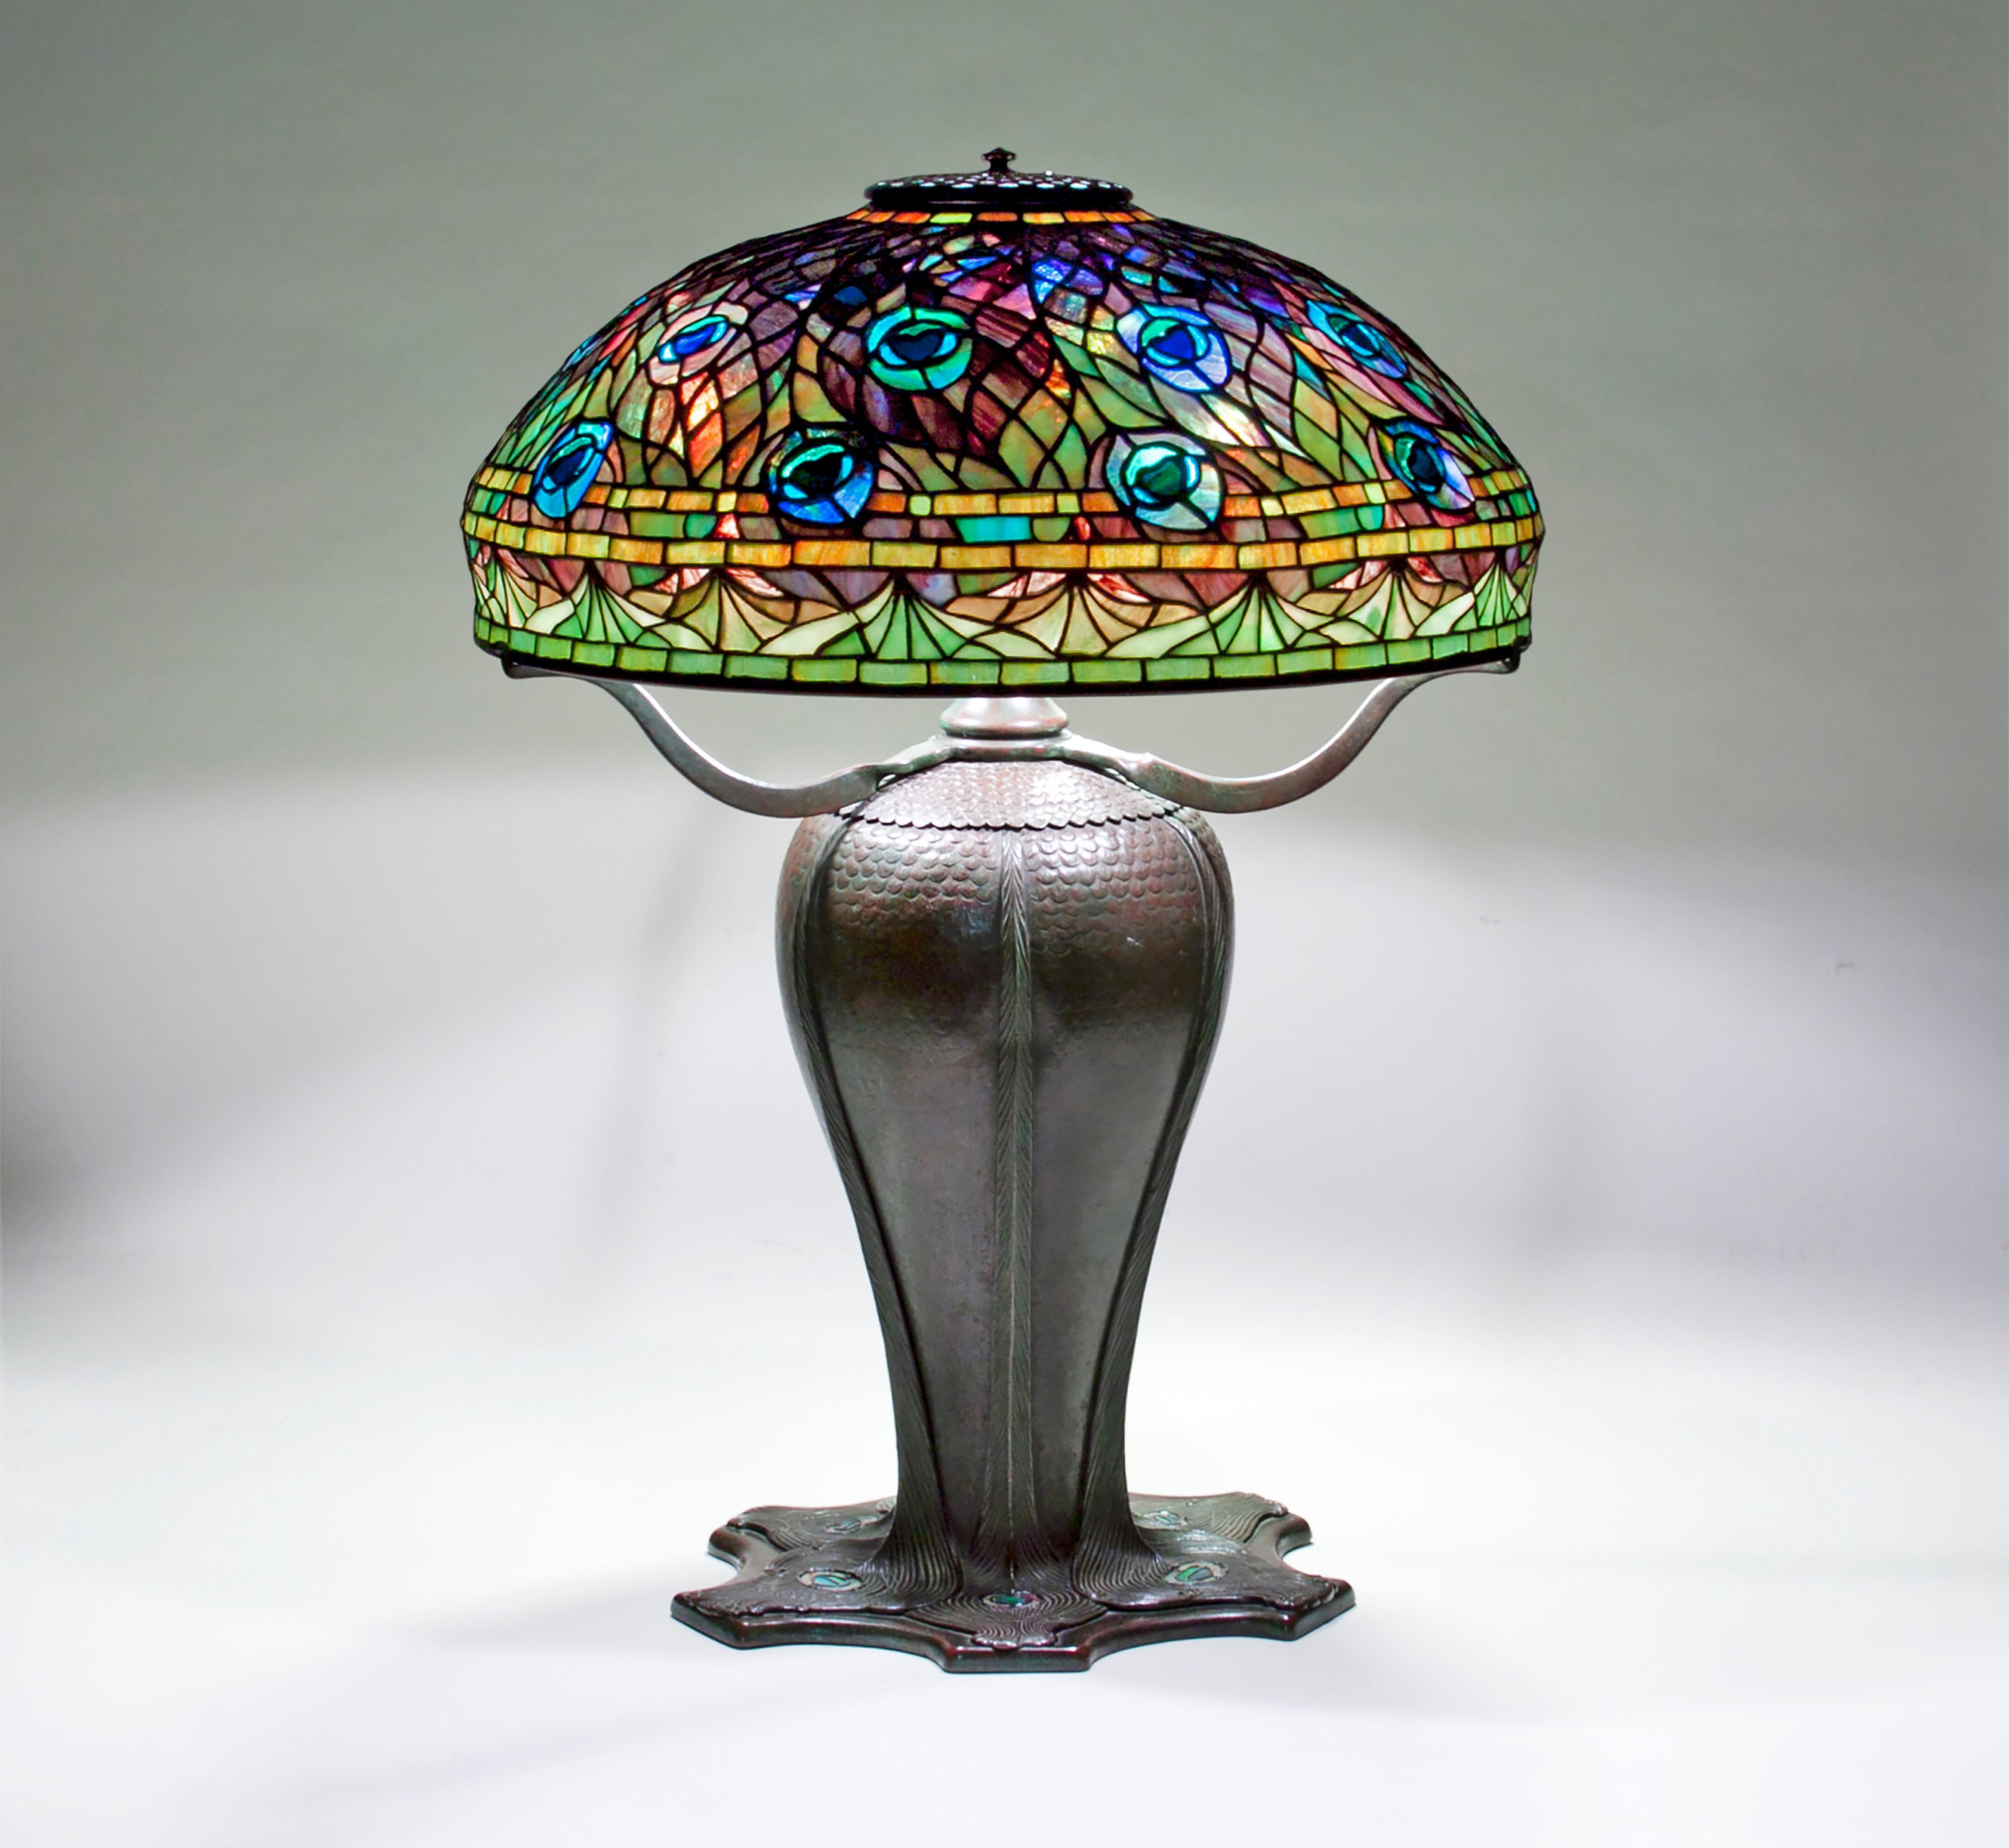 a tiffany table lamp, the dome shaped shade in leaded glass design depicting stylized swirling peacock feathers with bright blue eyes, the rest in shades of dark purple near the top shifting through orange and gold to green near the lower edge